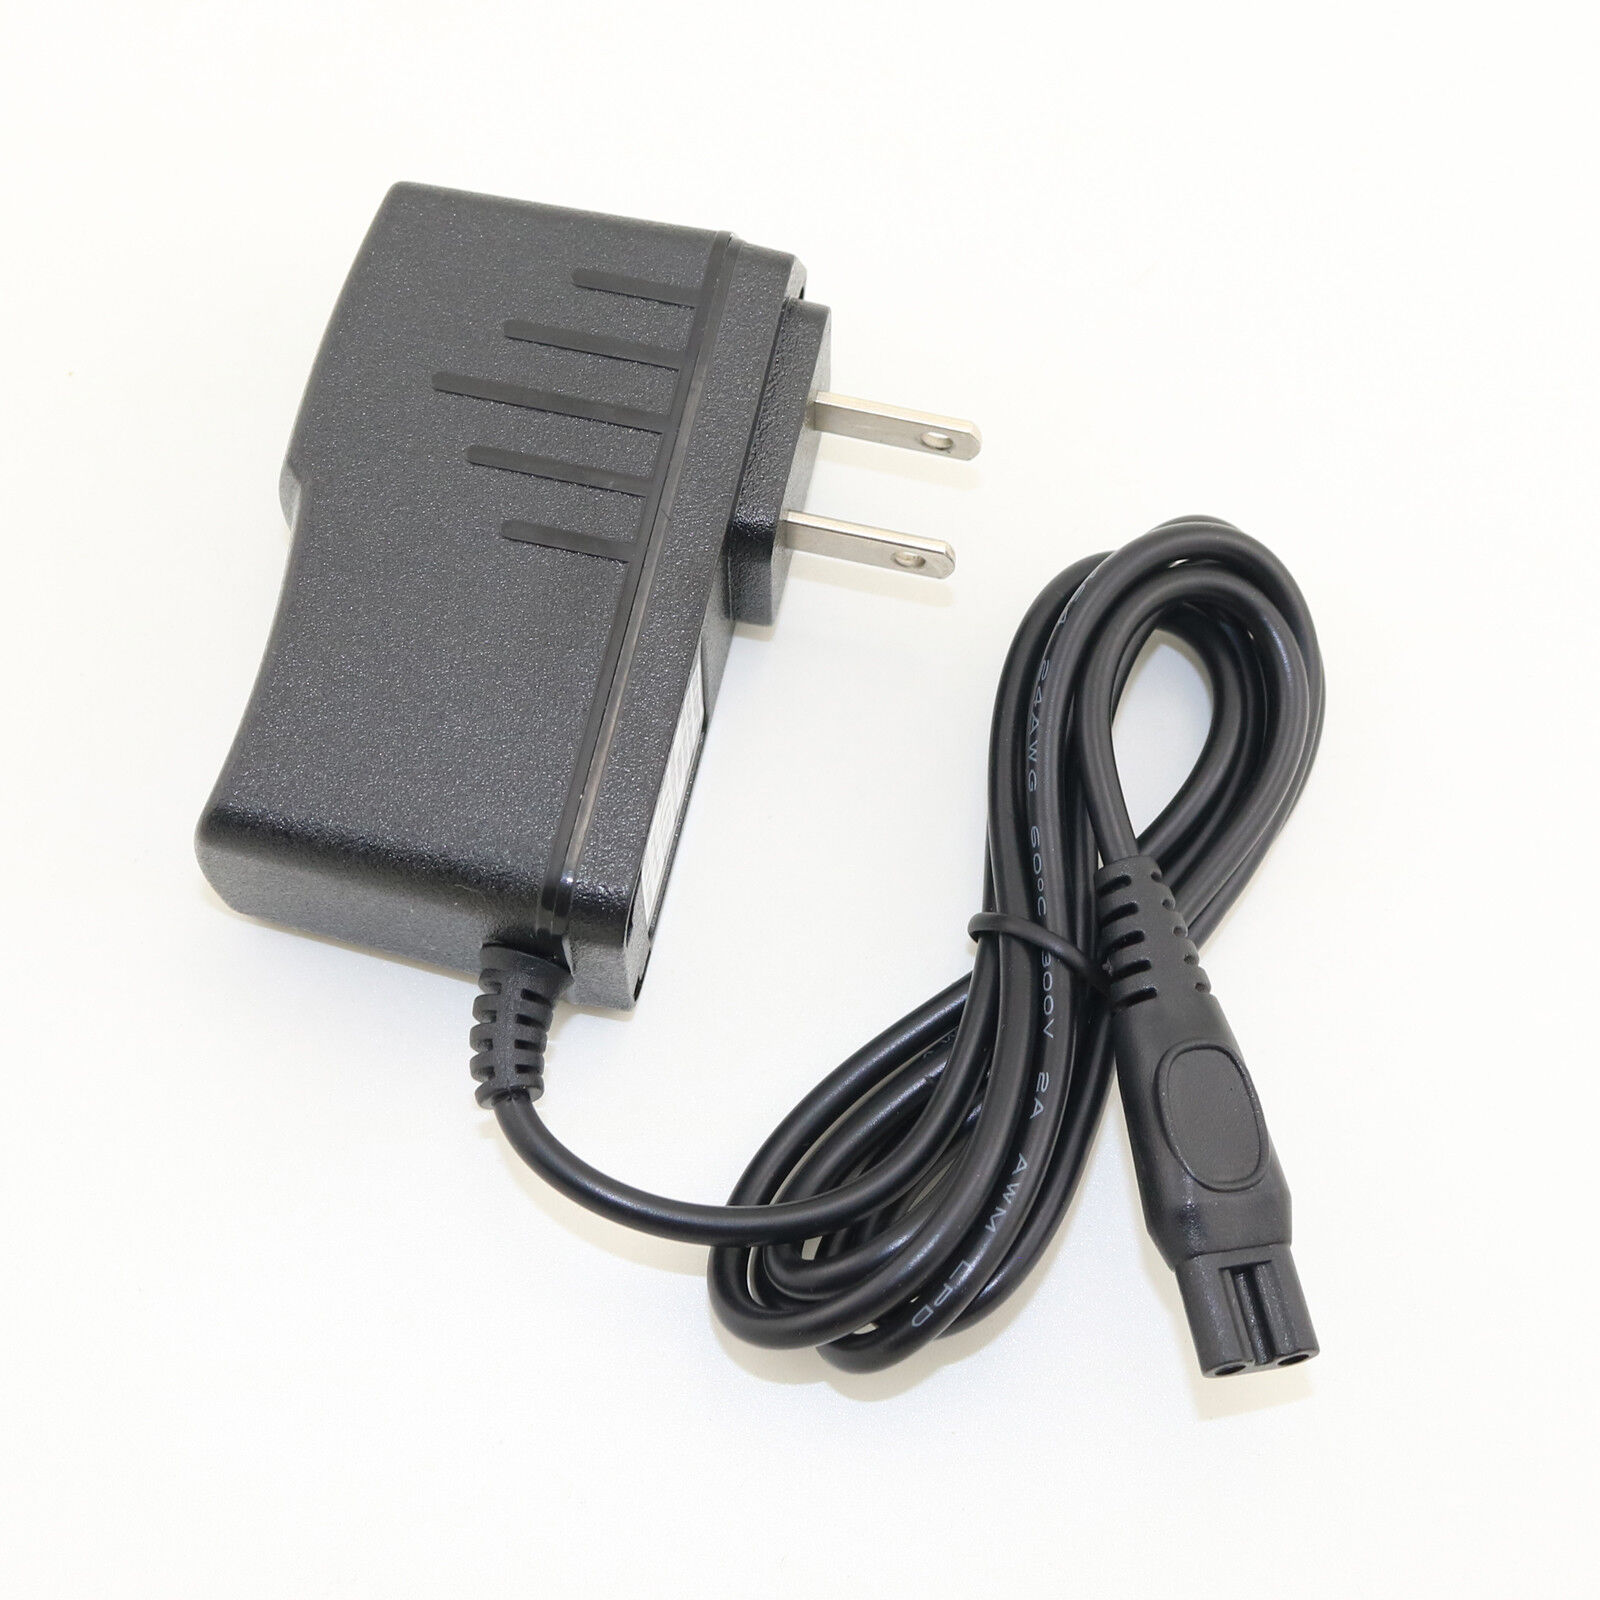 AC Adapter Charger Cord for Philips Norelco QT4000 Series Shaver QT4010 QT4014 AC Adapter Charger Cord for Philips Nore